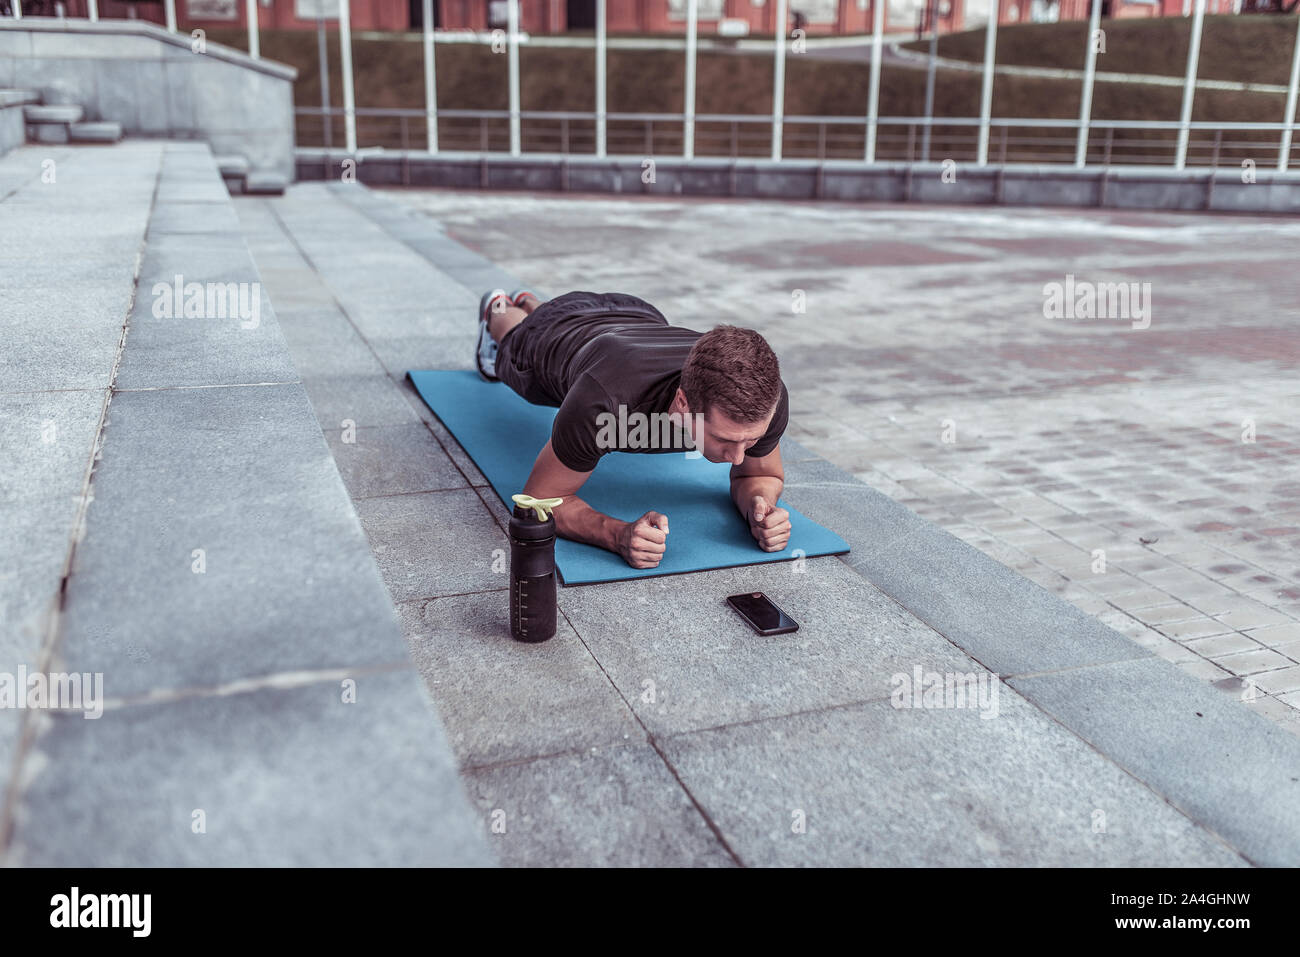 athlete man in summer in city, stands on bar, trains abdominal muscles and press, yoga mat, phone application in smartphone online timer, shaker with Stock Photo